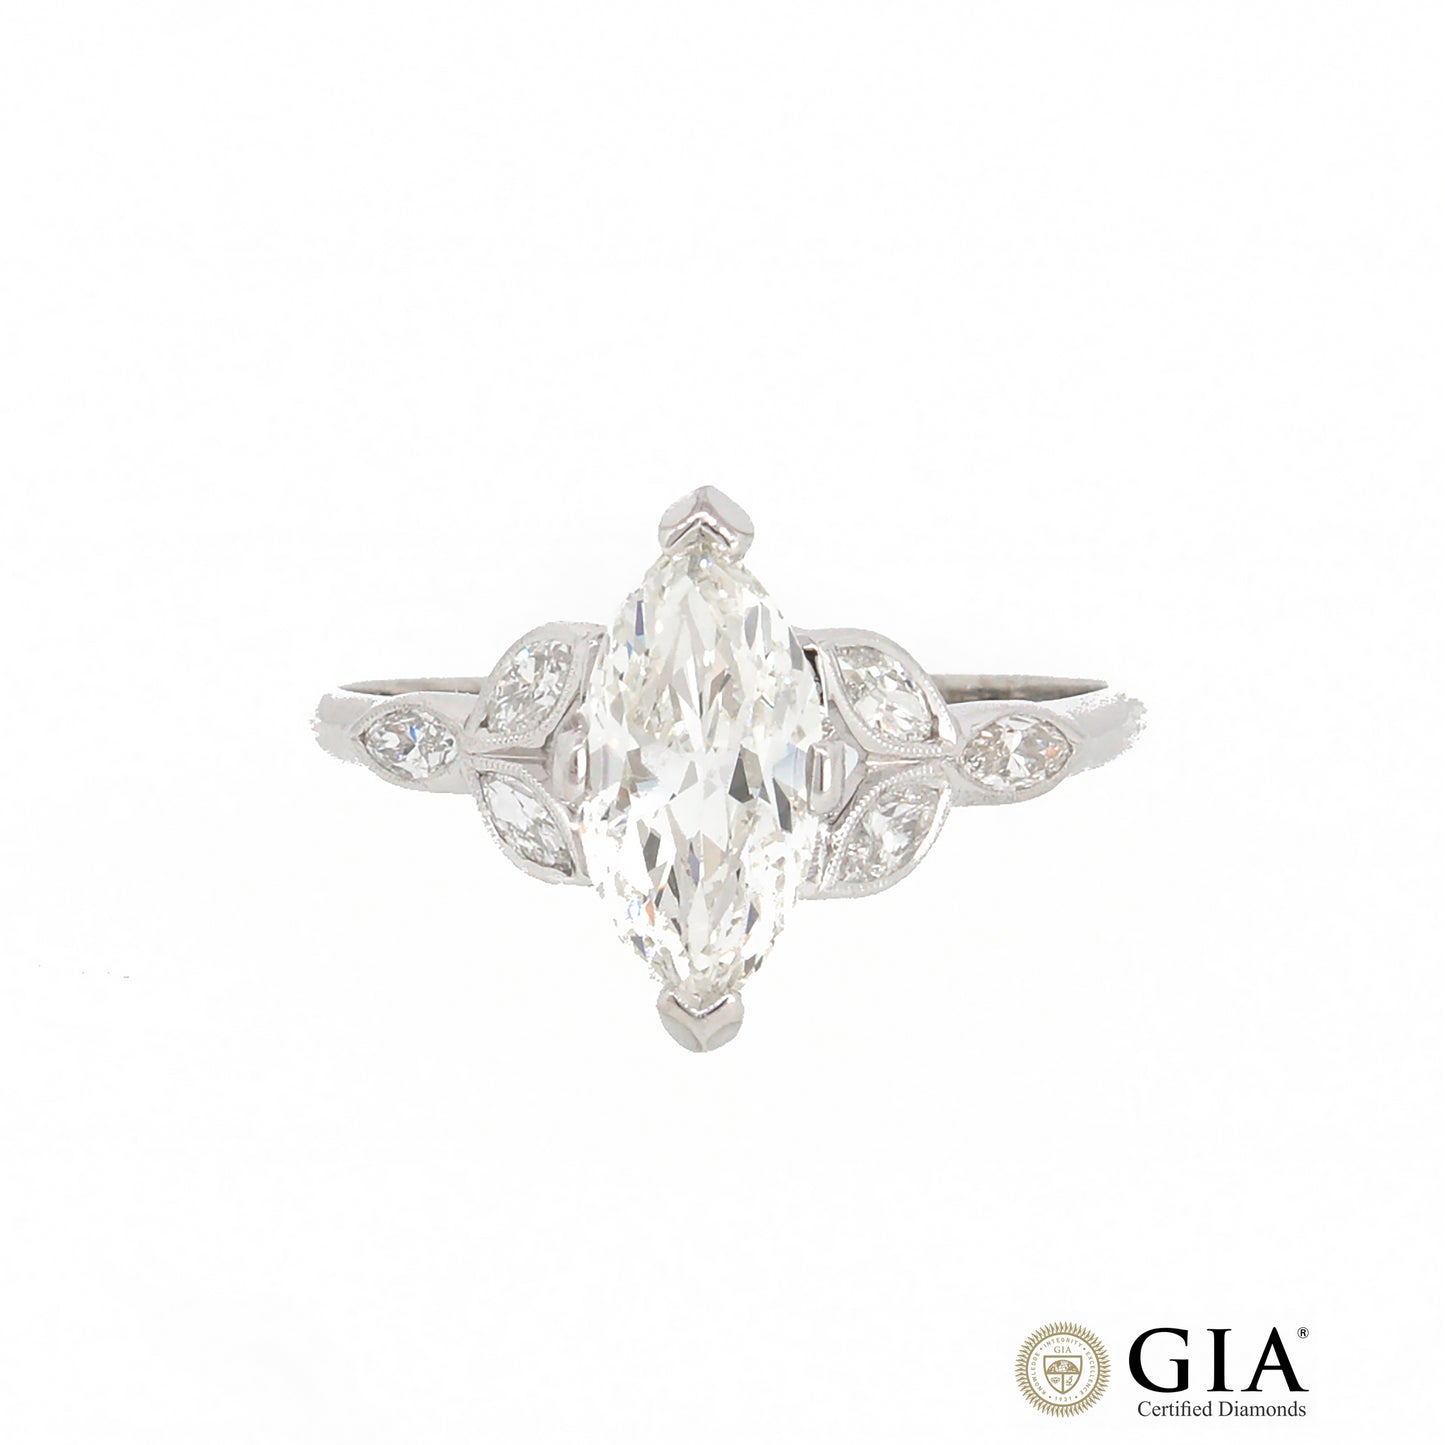 GIA Certified Marquise Cut Vintage Diamond Engagement Ring Size 8.5